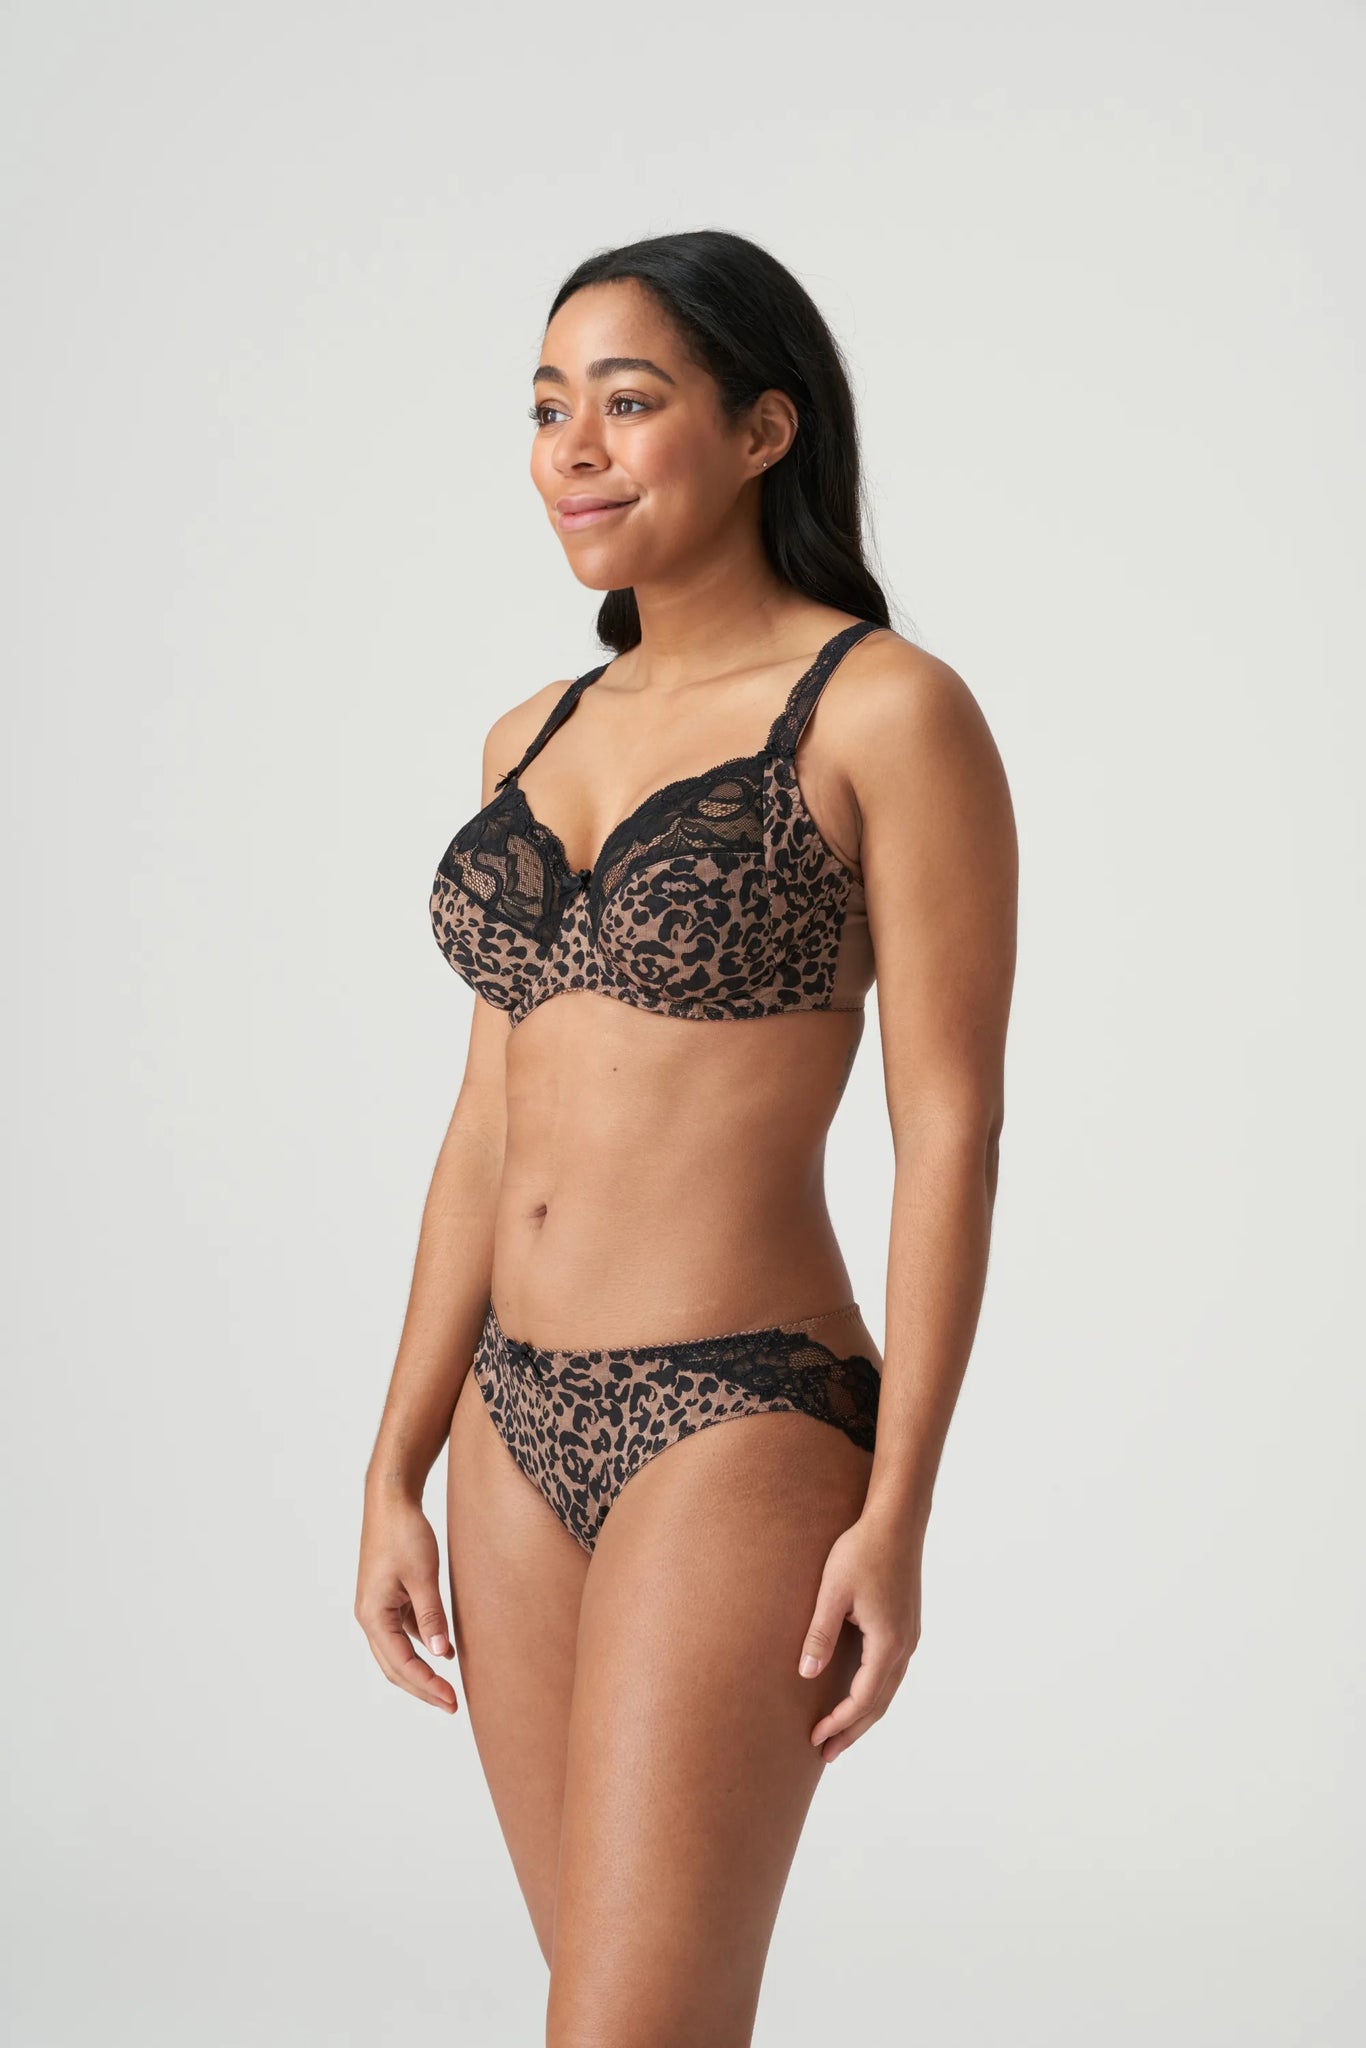 PRIMA DONNA BRA - Madison full cup 0162-121 34G (PD sizing) Toffee color  $50.00 - PicClick